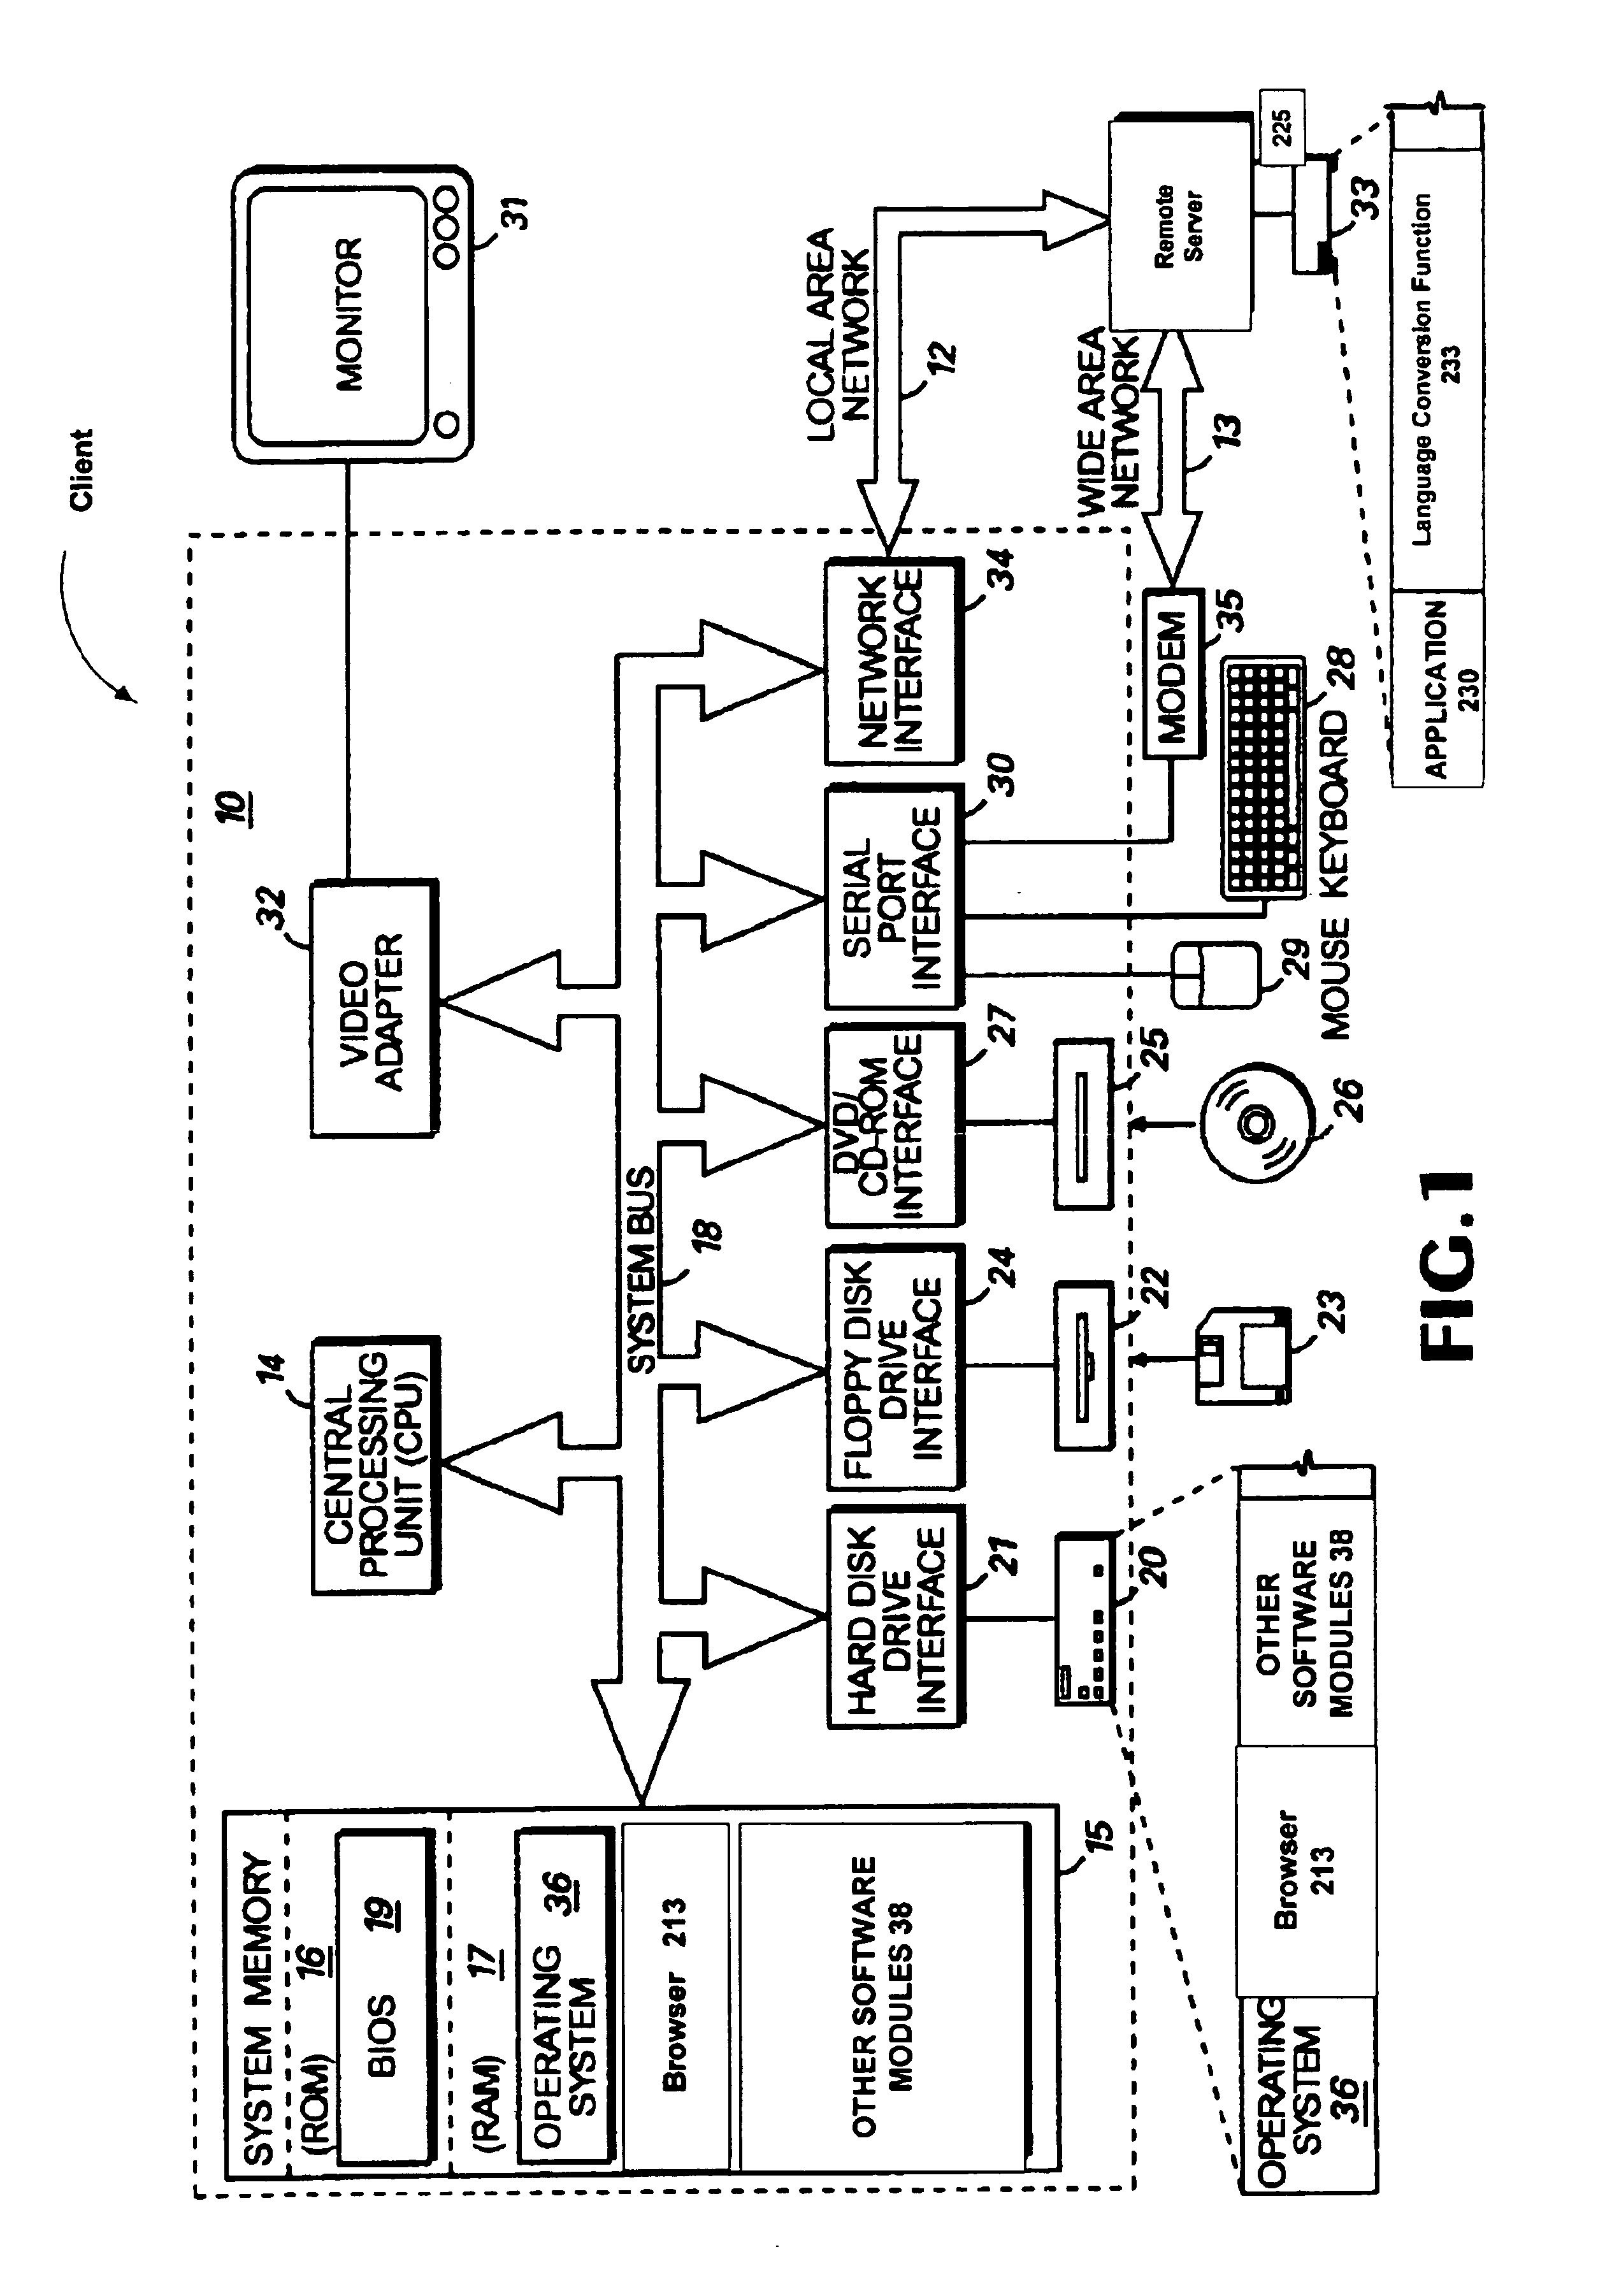 System and method for providing language localization for server-based applications